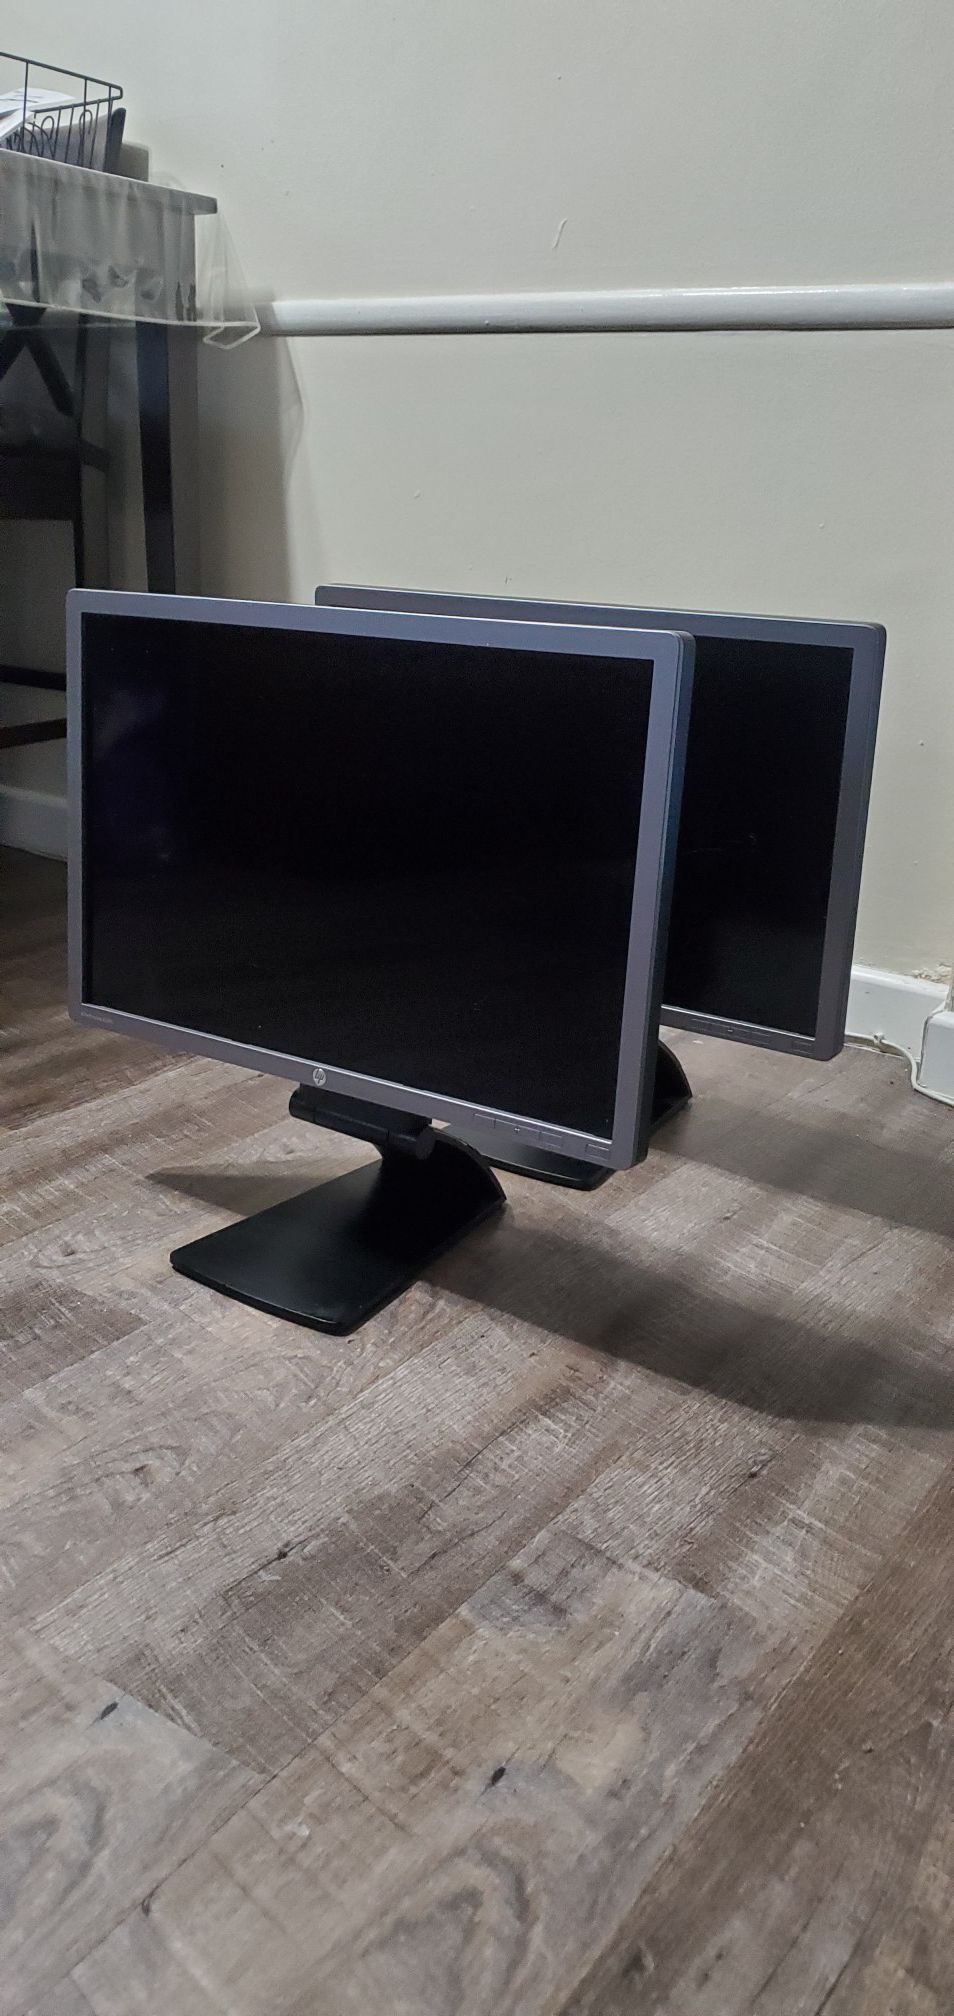 HP Monitor like new!! 24" Ultrawide. $30 each or $50 for both. All cables included!